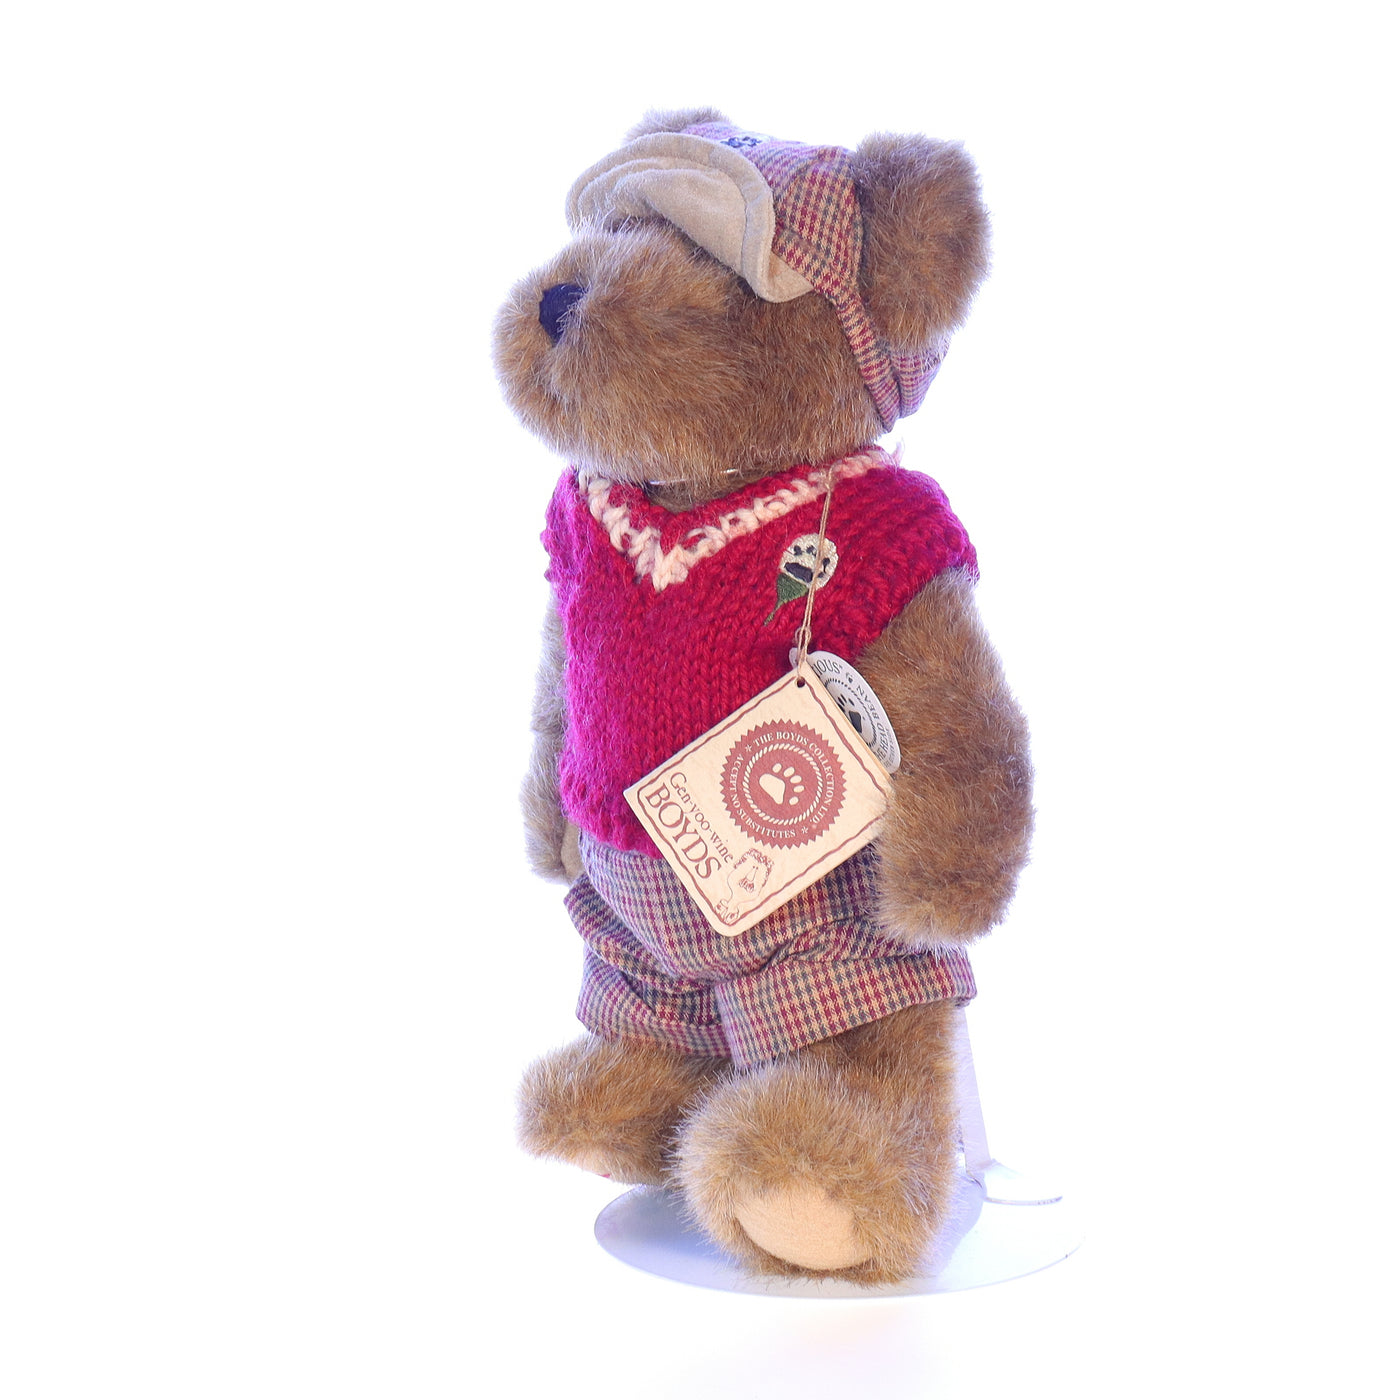 Boyds_Bears_and_Friends_918339_Putter_T_Parfore_TJs_Best_Dressed_Stuffed_Animal_1988 Front Left View